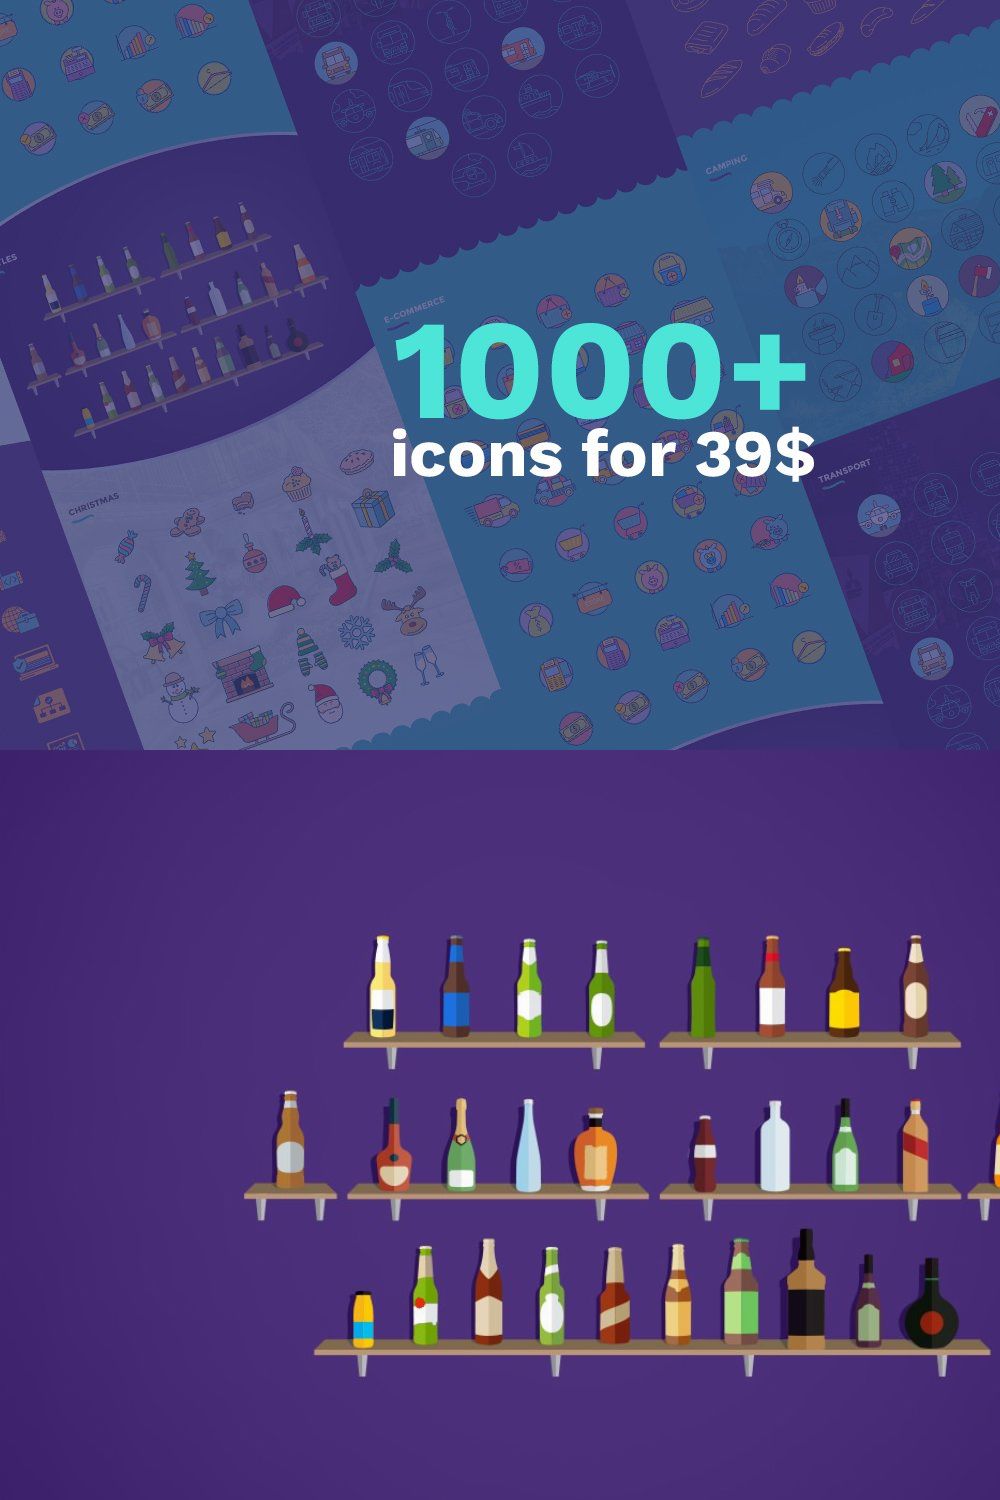 1035 icons for $39 (instead of $375) pinterest preview image.